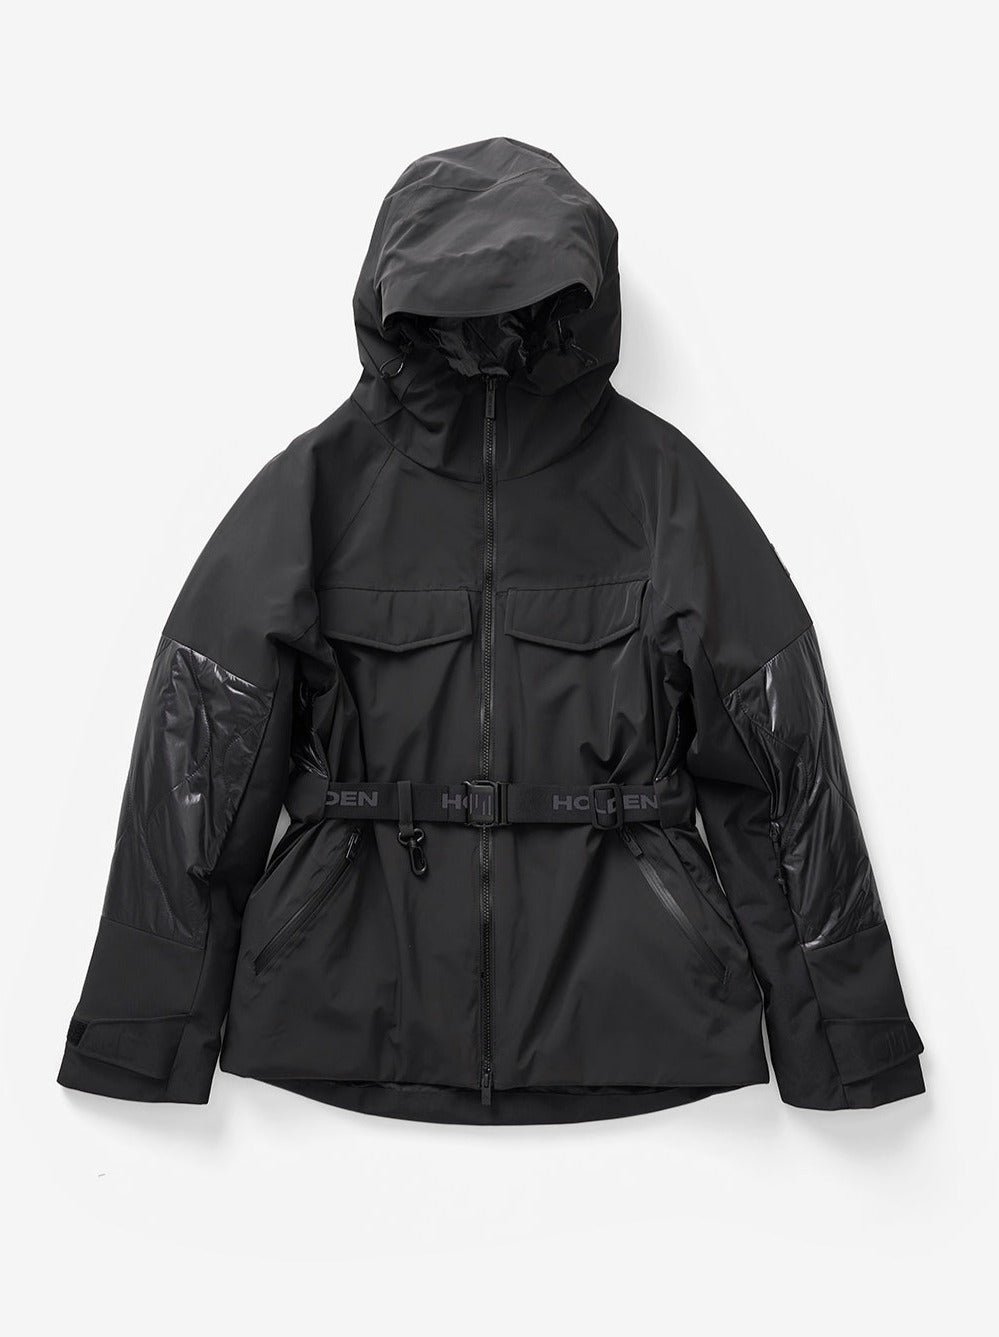 Women's Belted Parka - Black - flat lay - front